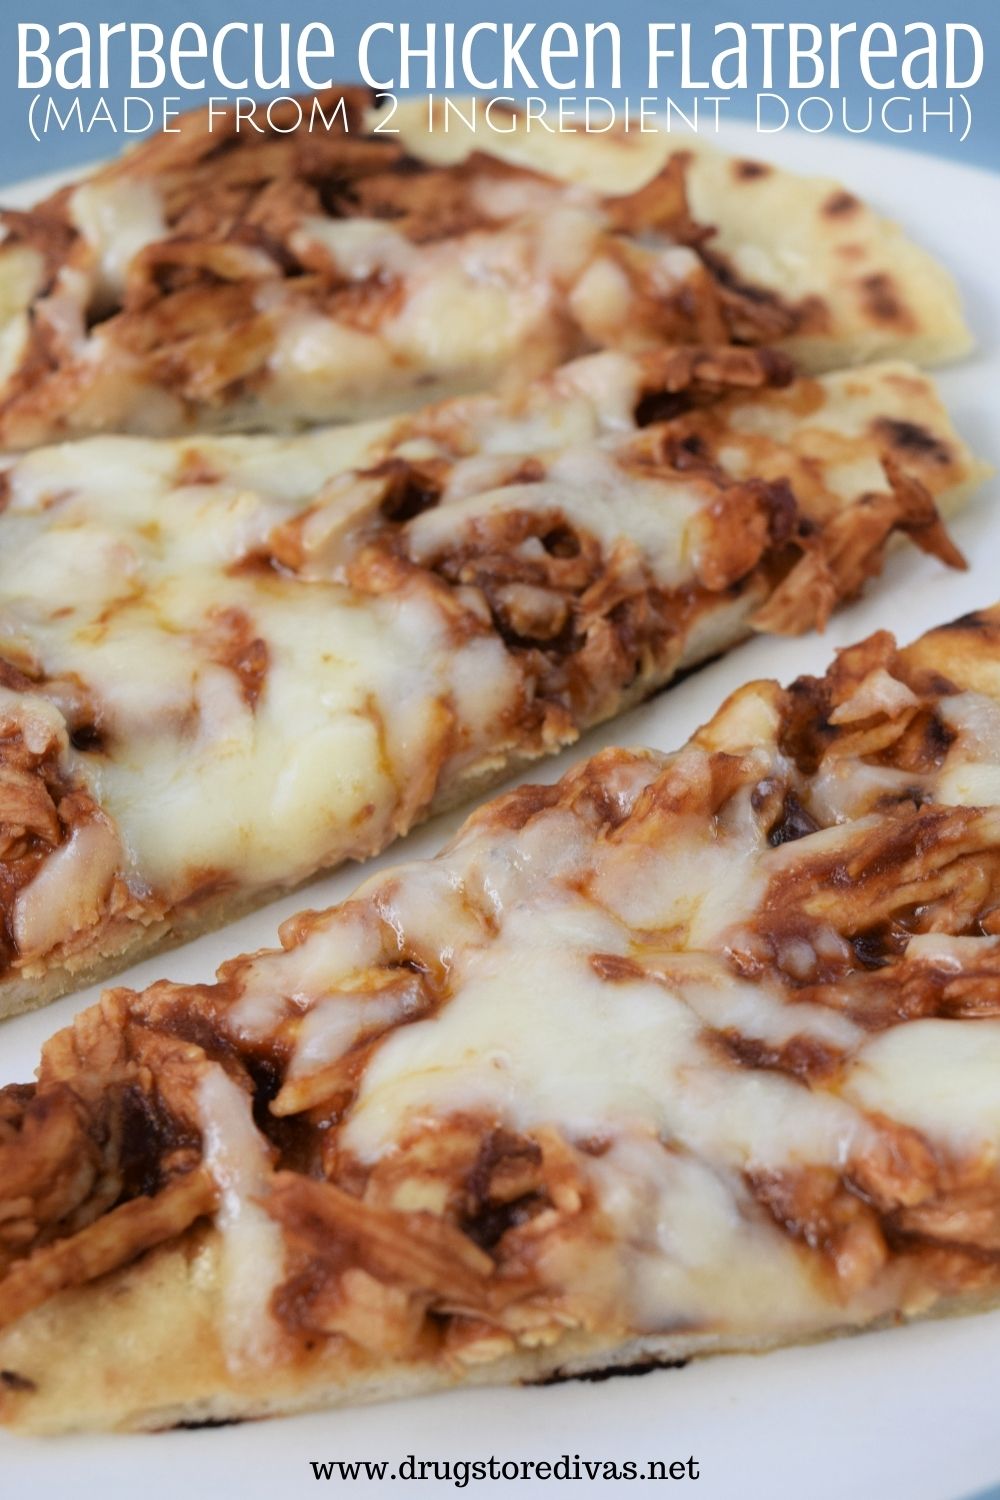 Barbecue Chicken Flatbread on a plate with the words 